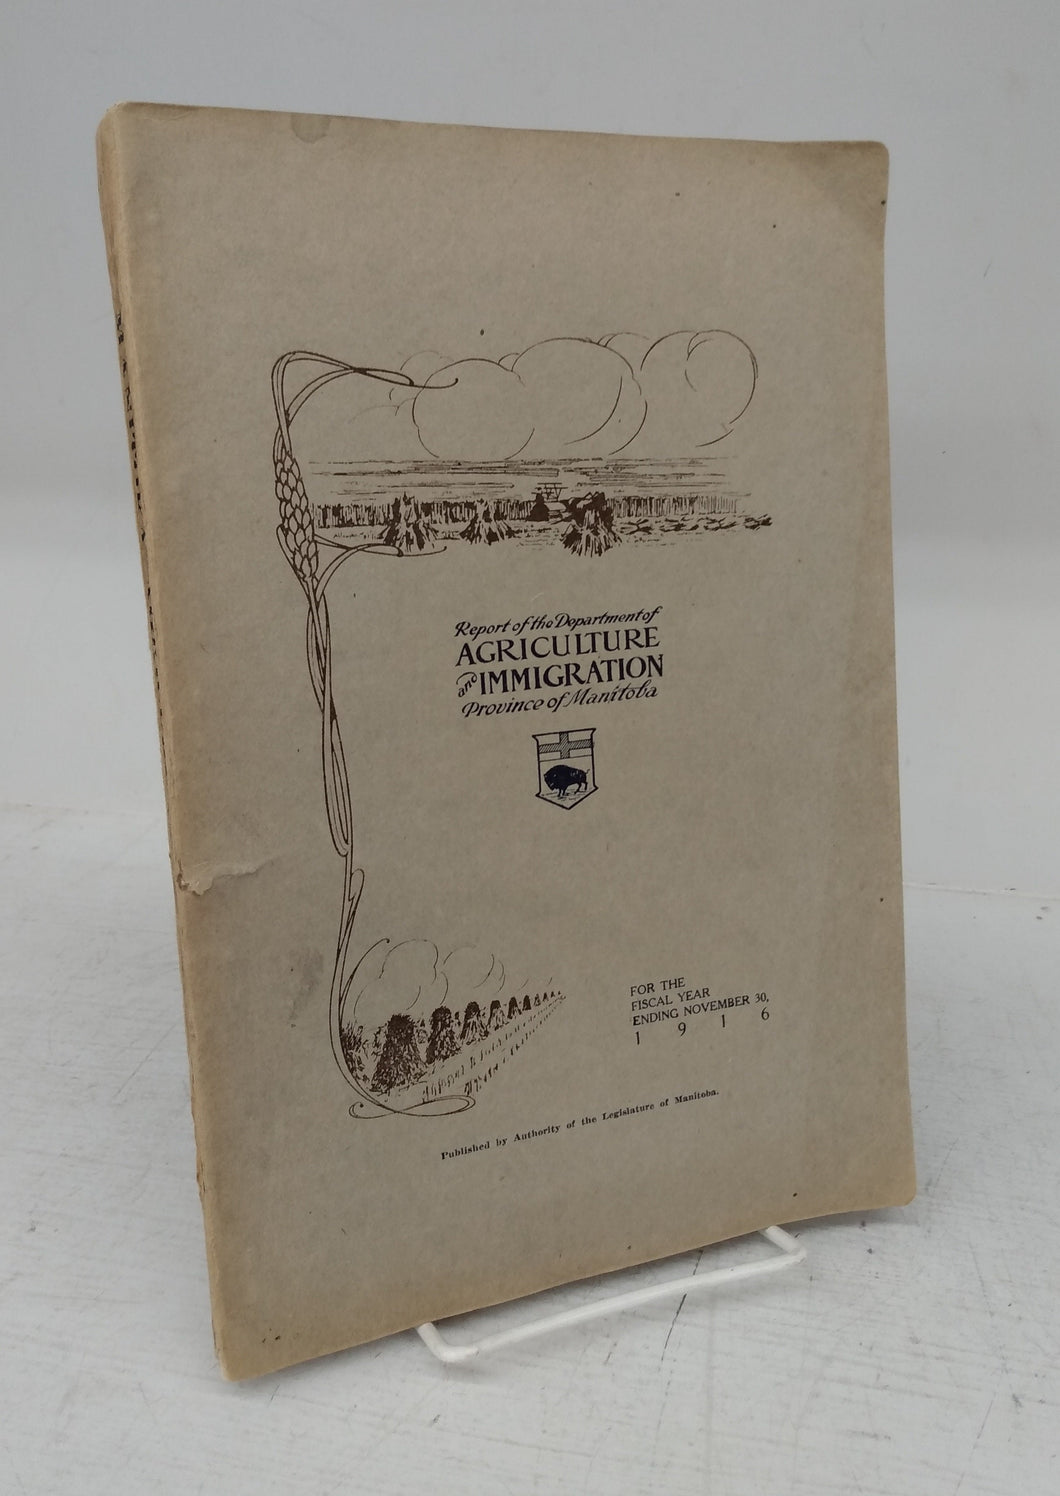 Annual Report of the Department of Agriculture and Immigration of the Province of Manitoba for the Fiscal Year Ending November 30th, 1916